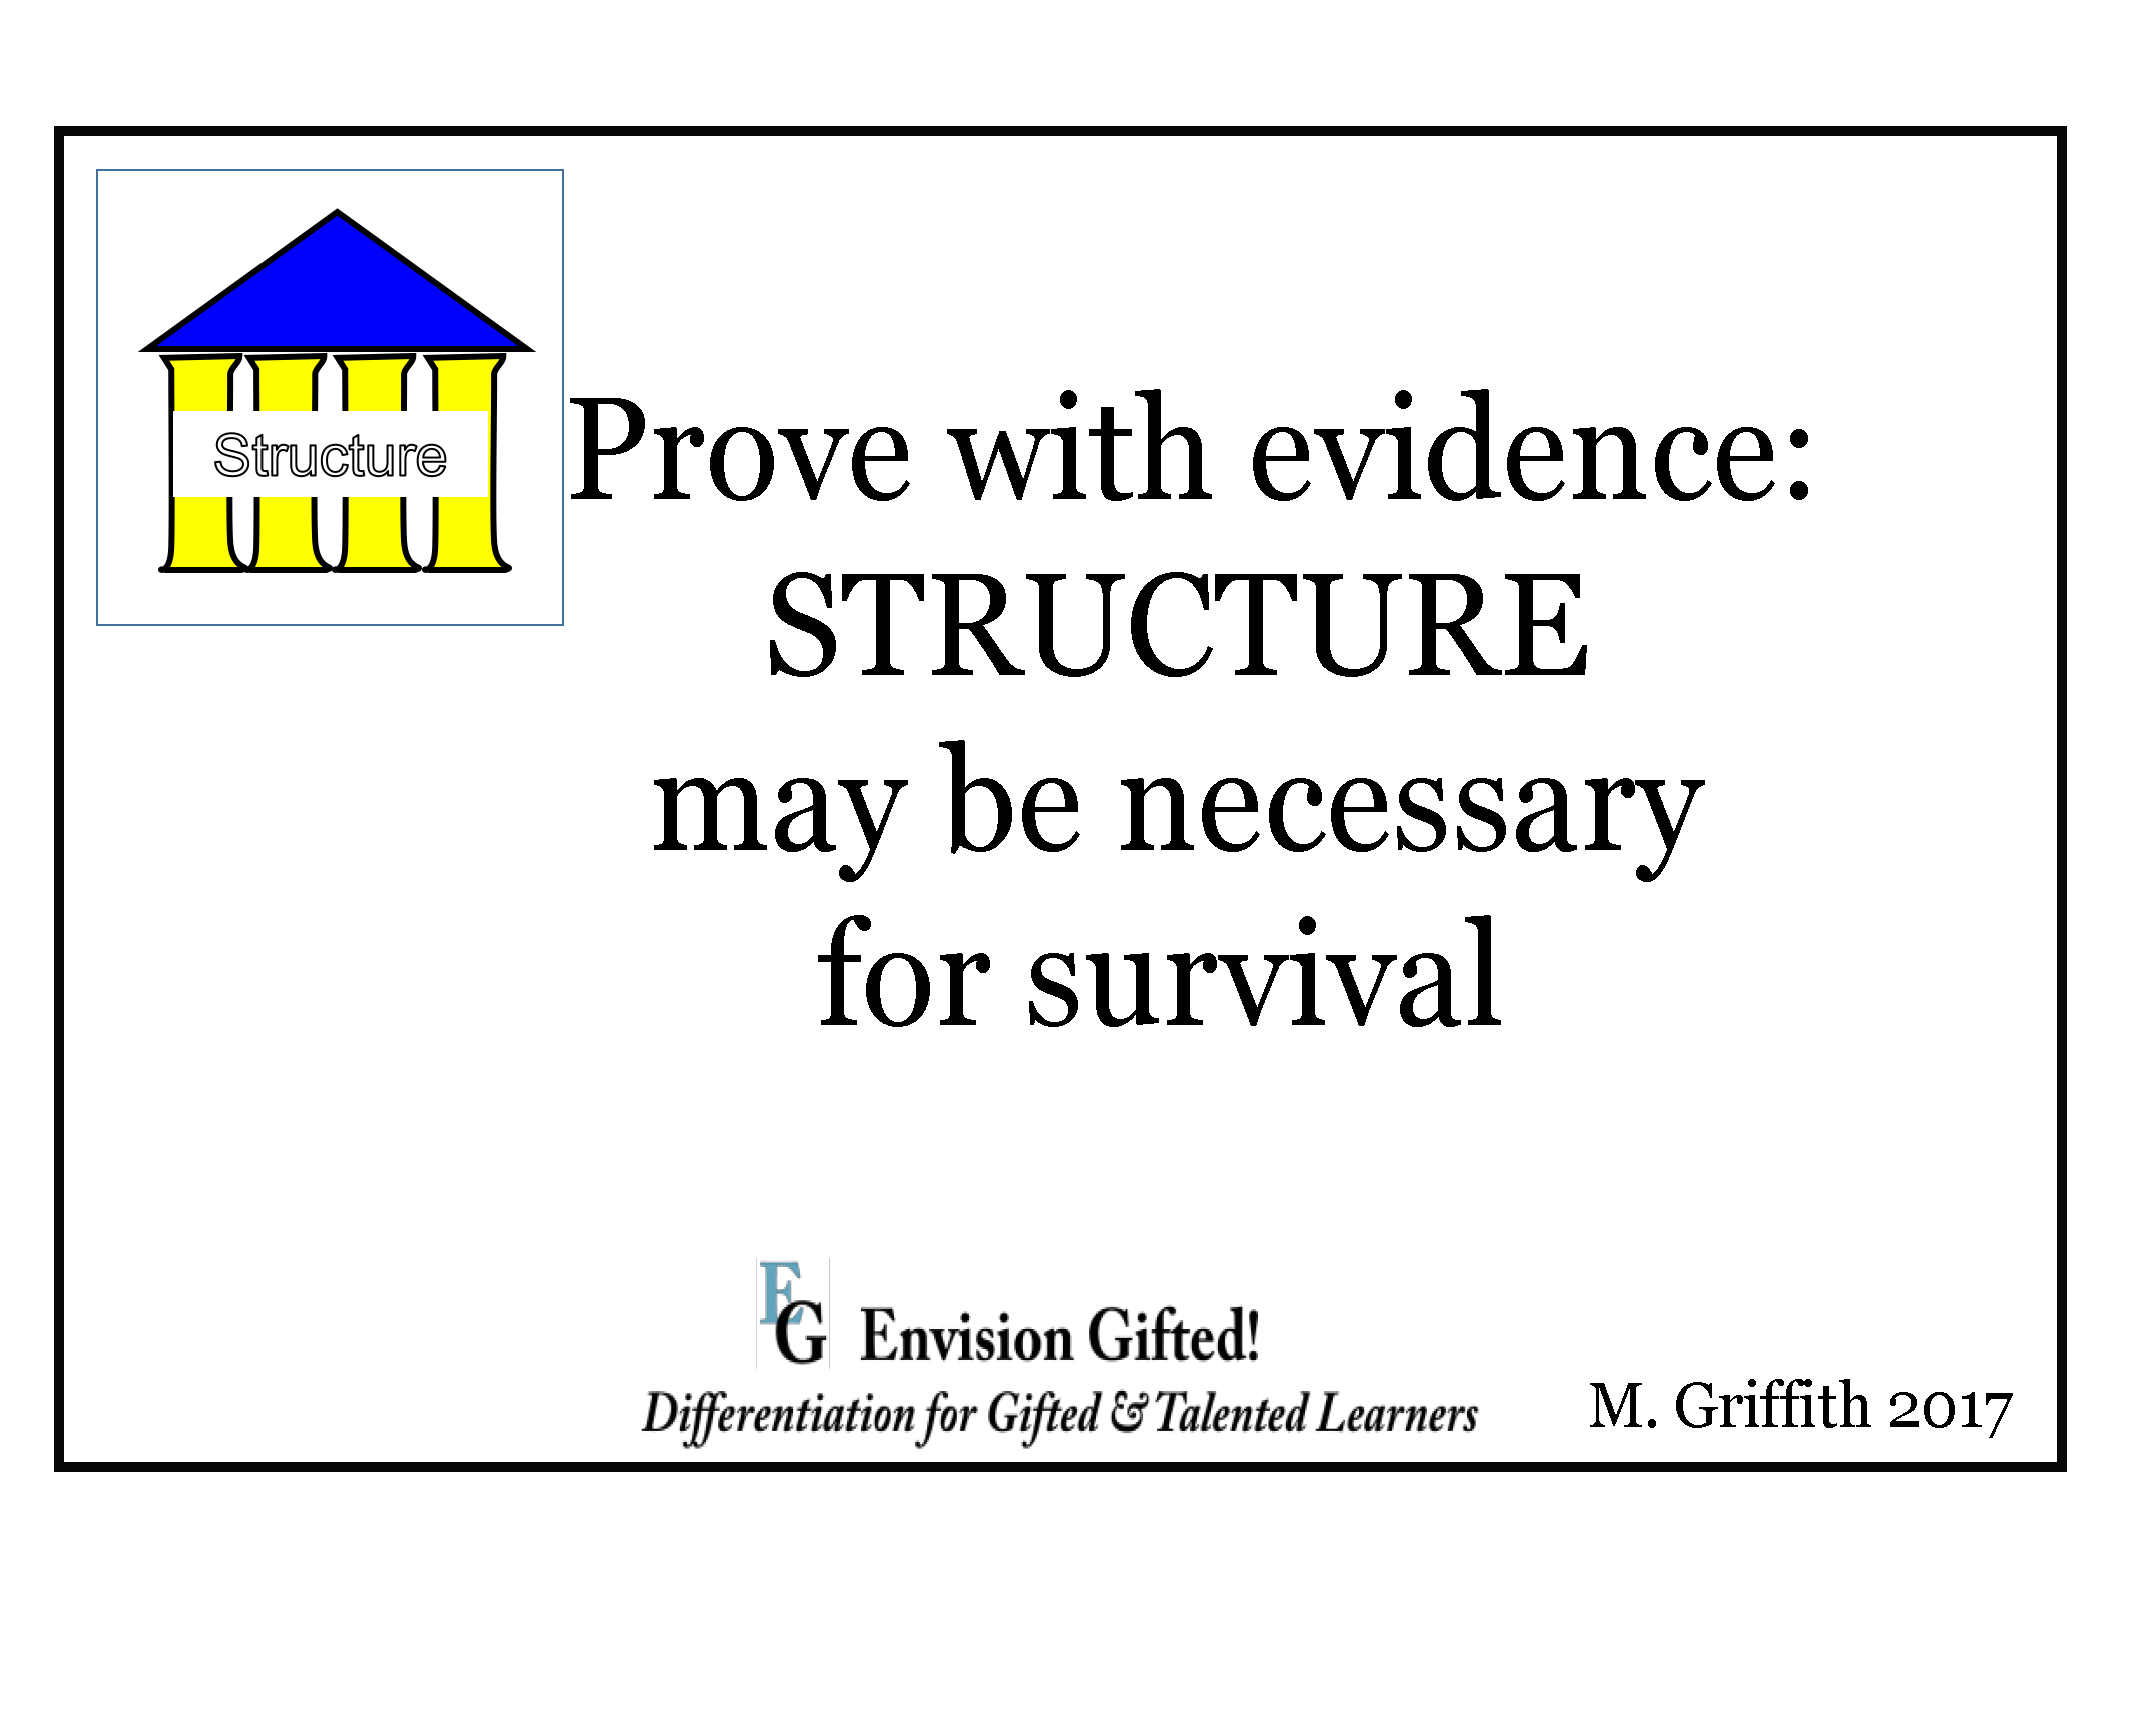 Envision Gifted. Universal Theme Structure As Necessary For Survival